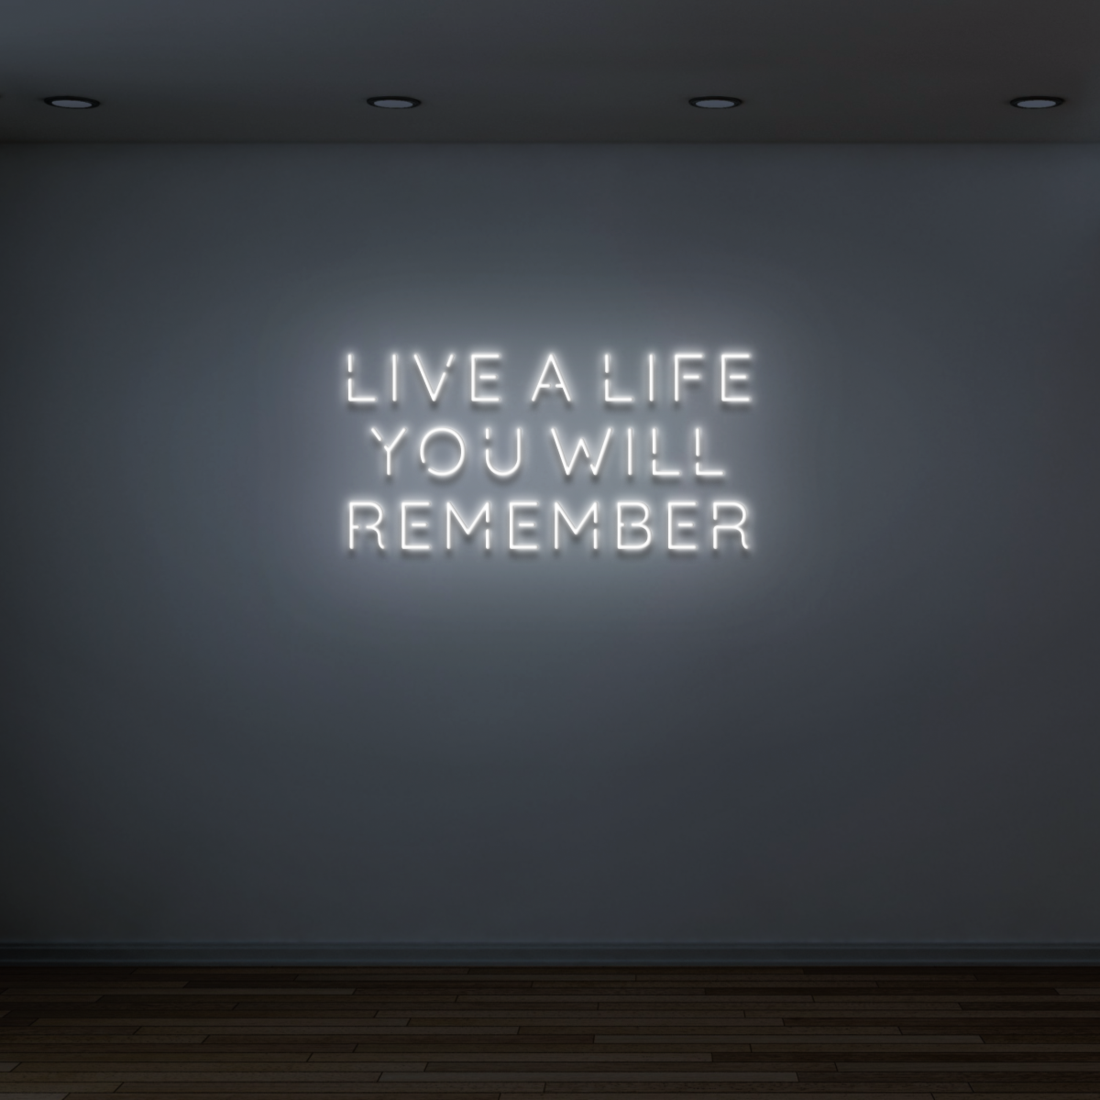 "LIVE A LIFE YOU WILL REMEMBER" - NEONIDAS NEONSCHILD LED-SCHILD